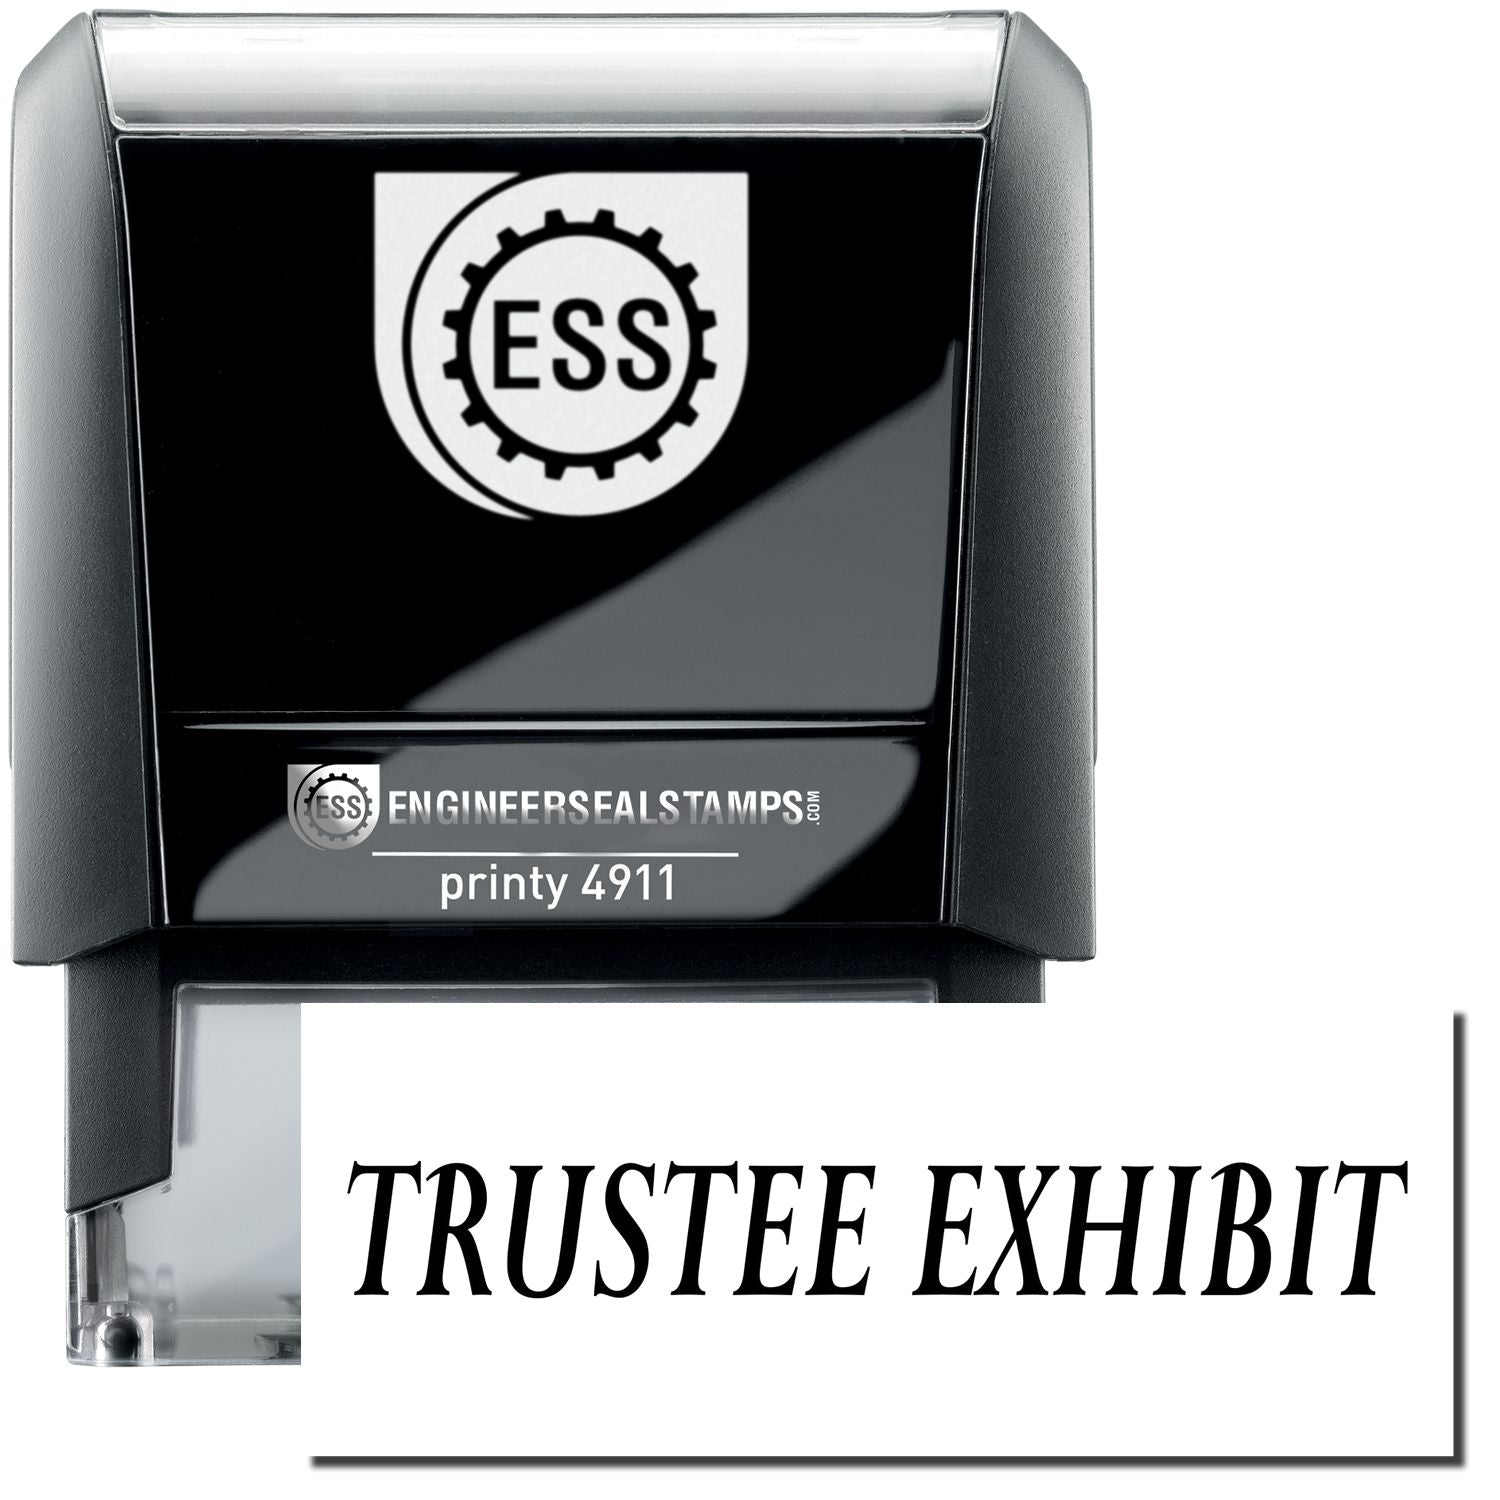 A self-inking stamp with a stamped image showing how the text "TRUSTEE EXHIBIT" is displayed after stamping.